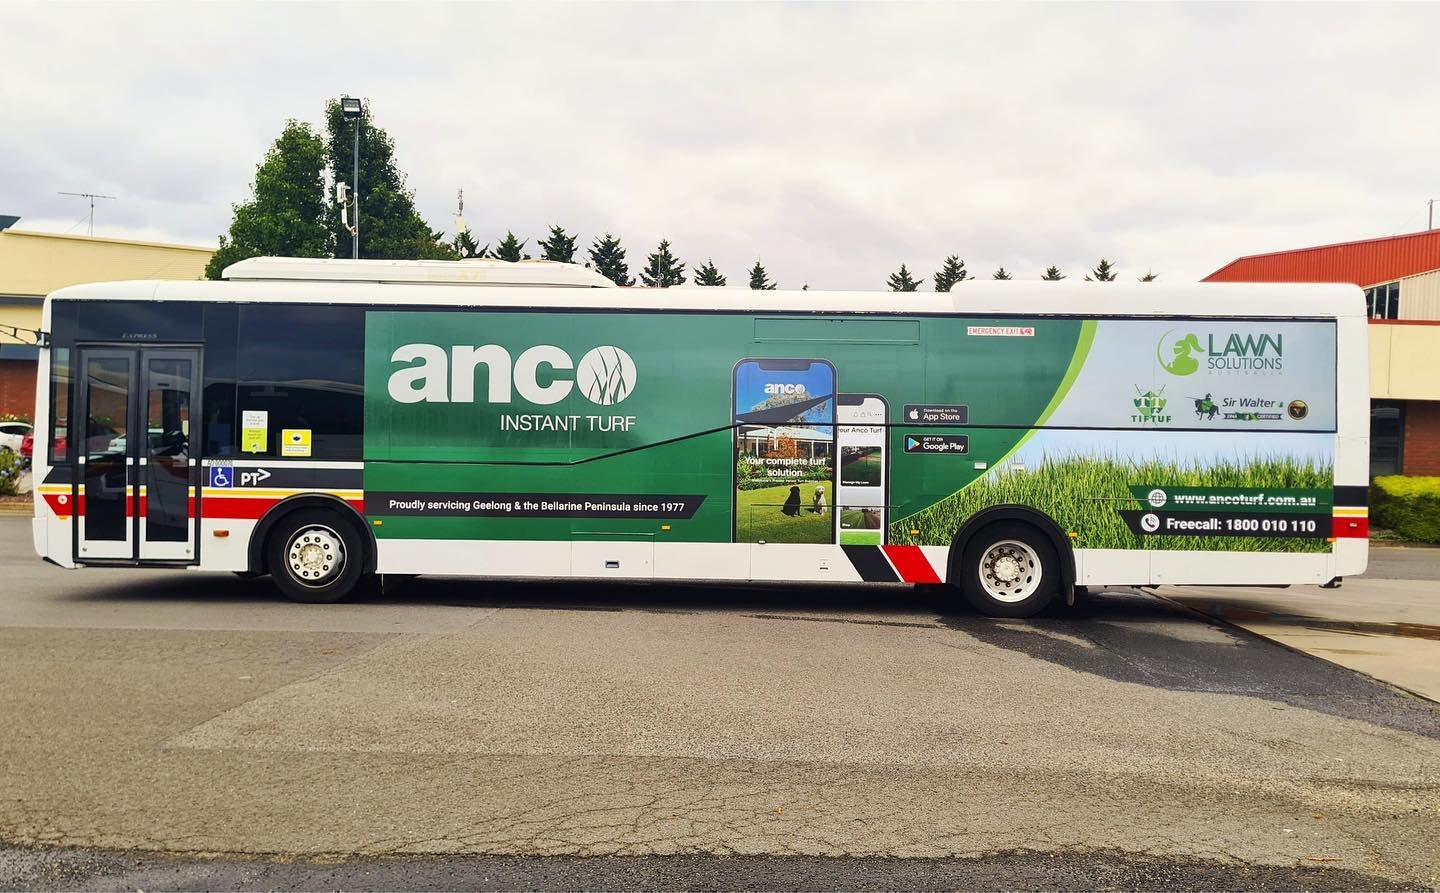 Are you needing turf? Did you know that @ancoturf has a 10year warranty, over 40 years experience and a prompt delivery service? #ancoinstantturf